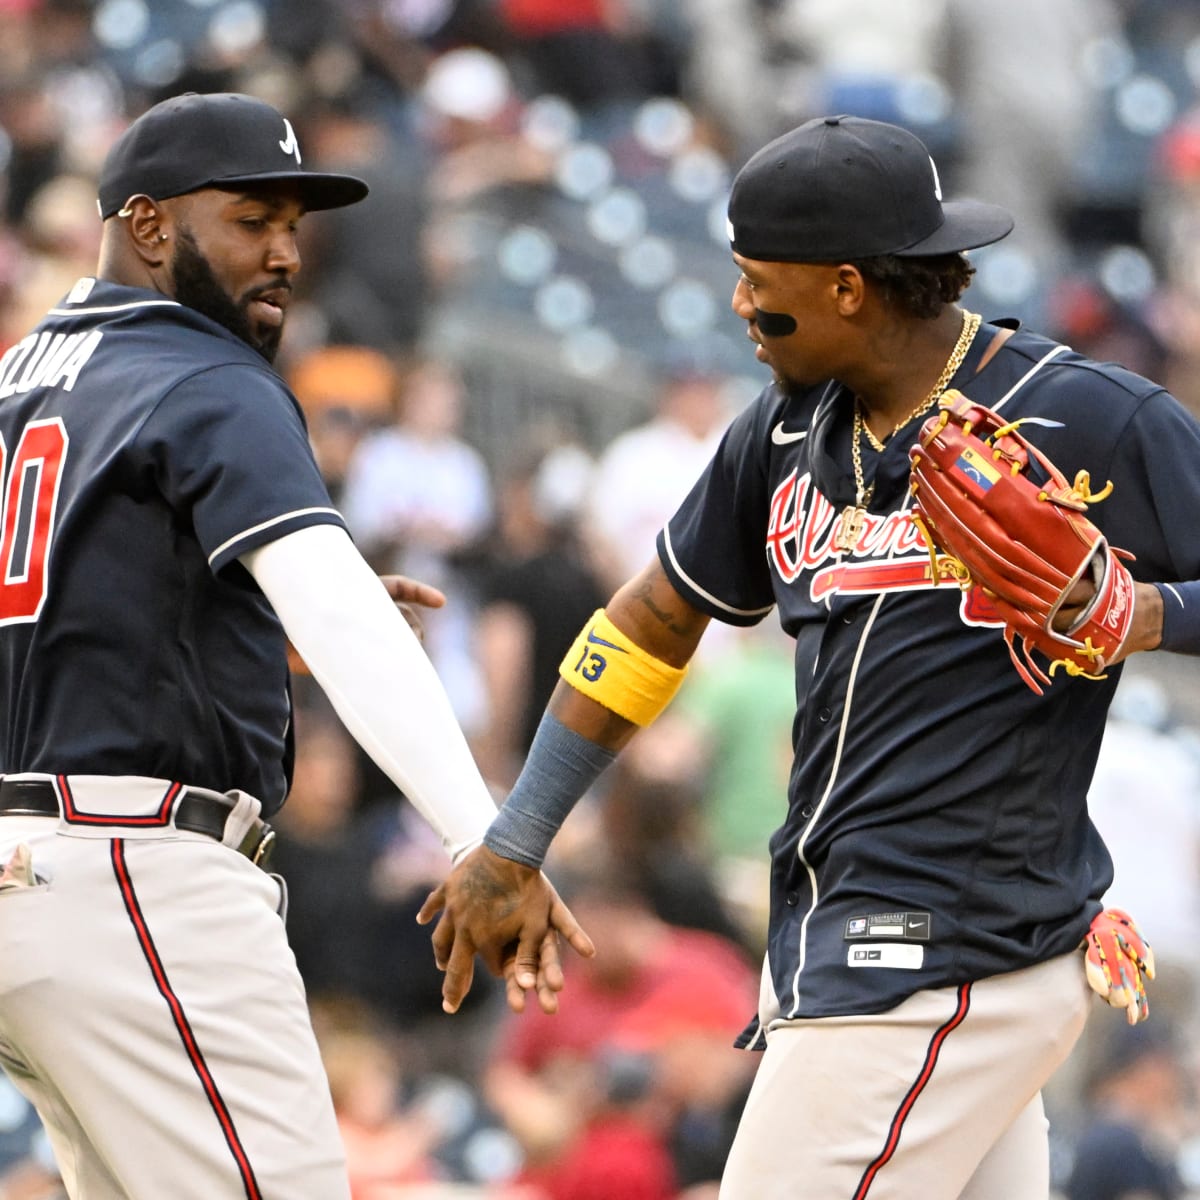 Braves News: Dereck Rodriguez gets the call, Braves fall 2-1, more -  Battery Power